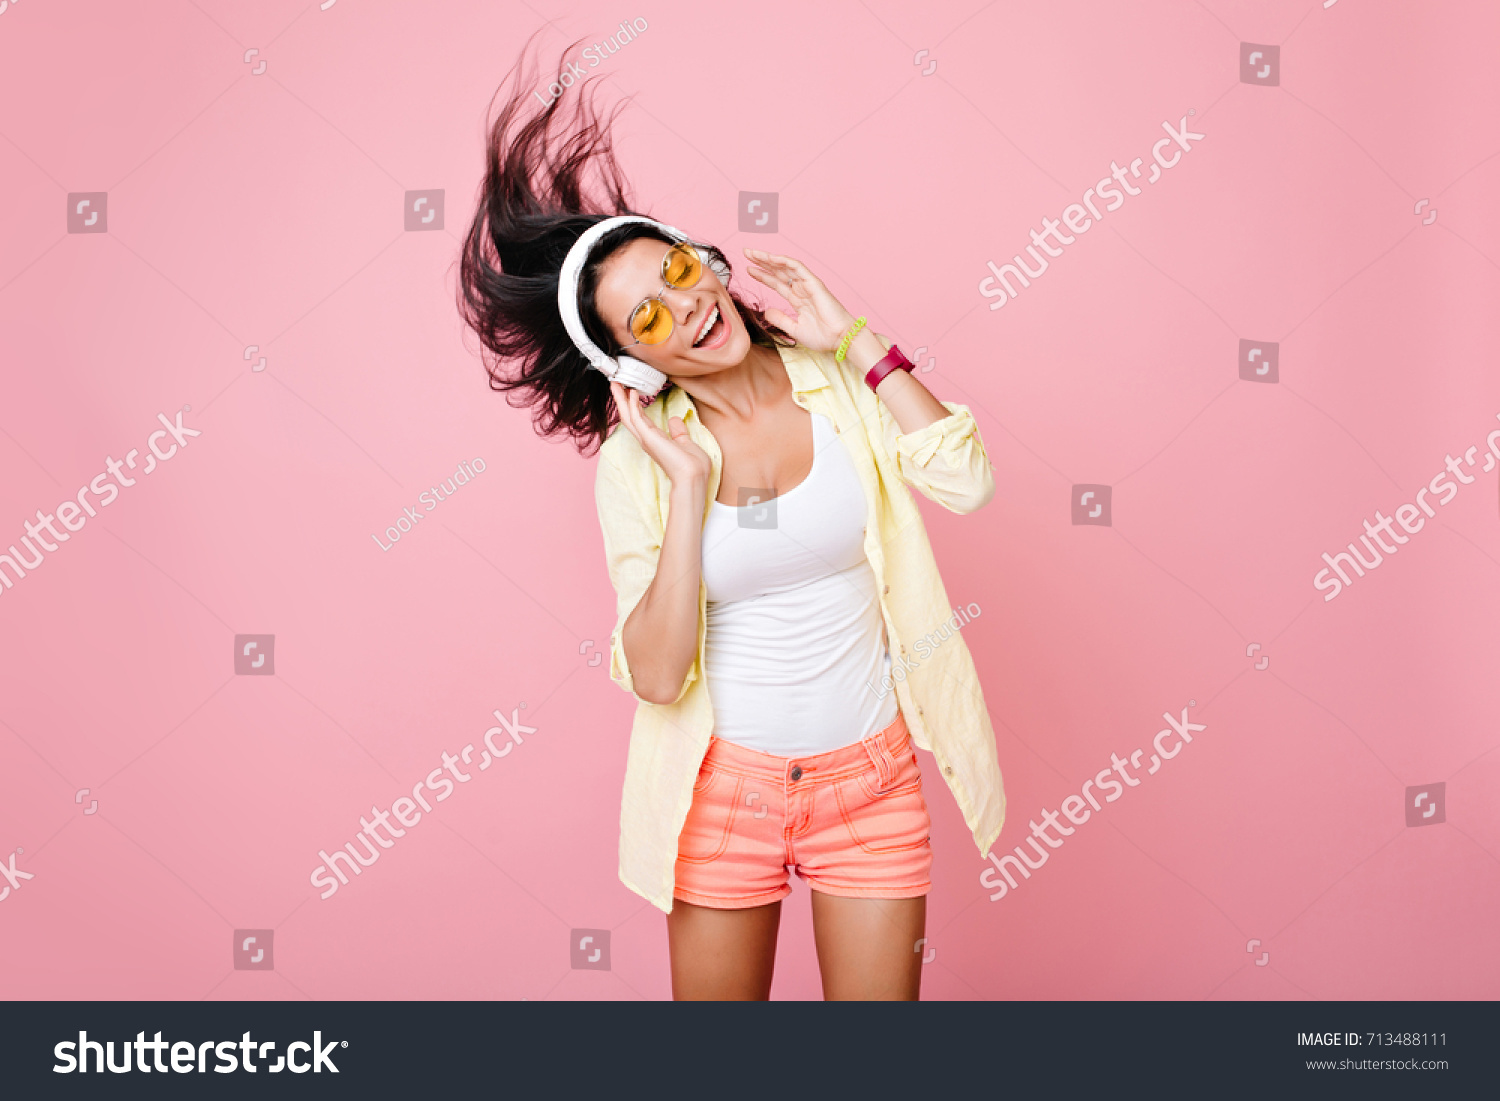 Gorgeous brunette lady in yellow glasses listening music in headphones and singing on pink background. Charming girl in shorts and earphones dancing with hair waving and eyes closed. #713488111